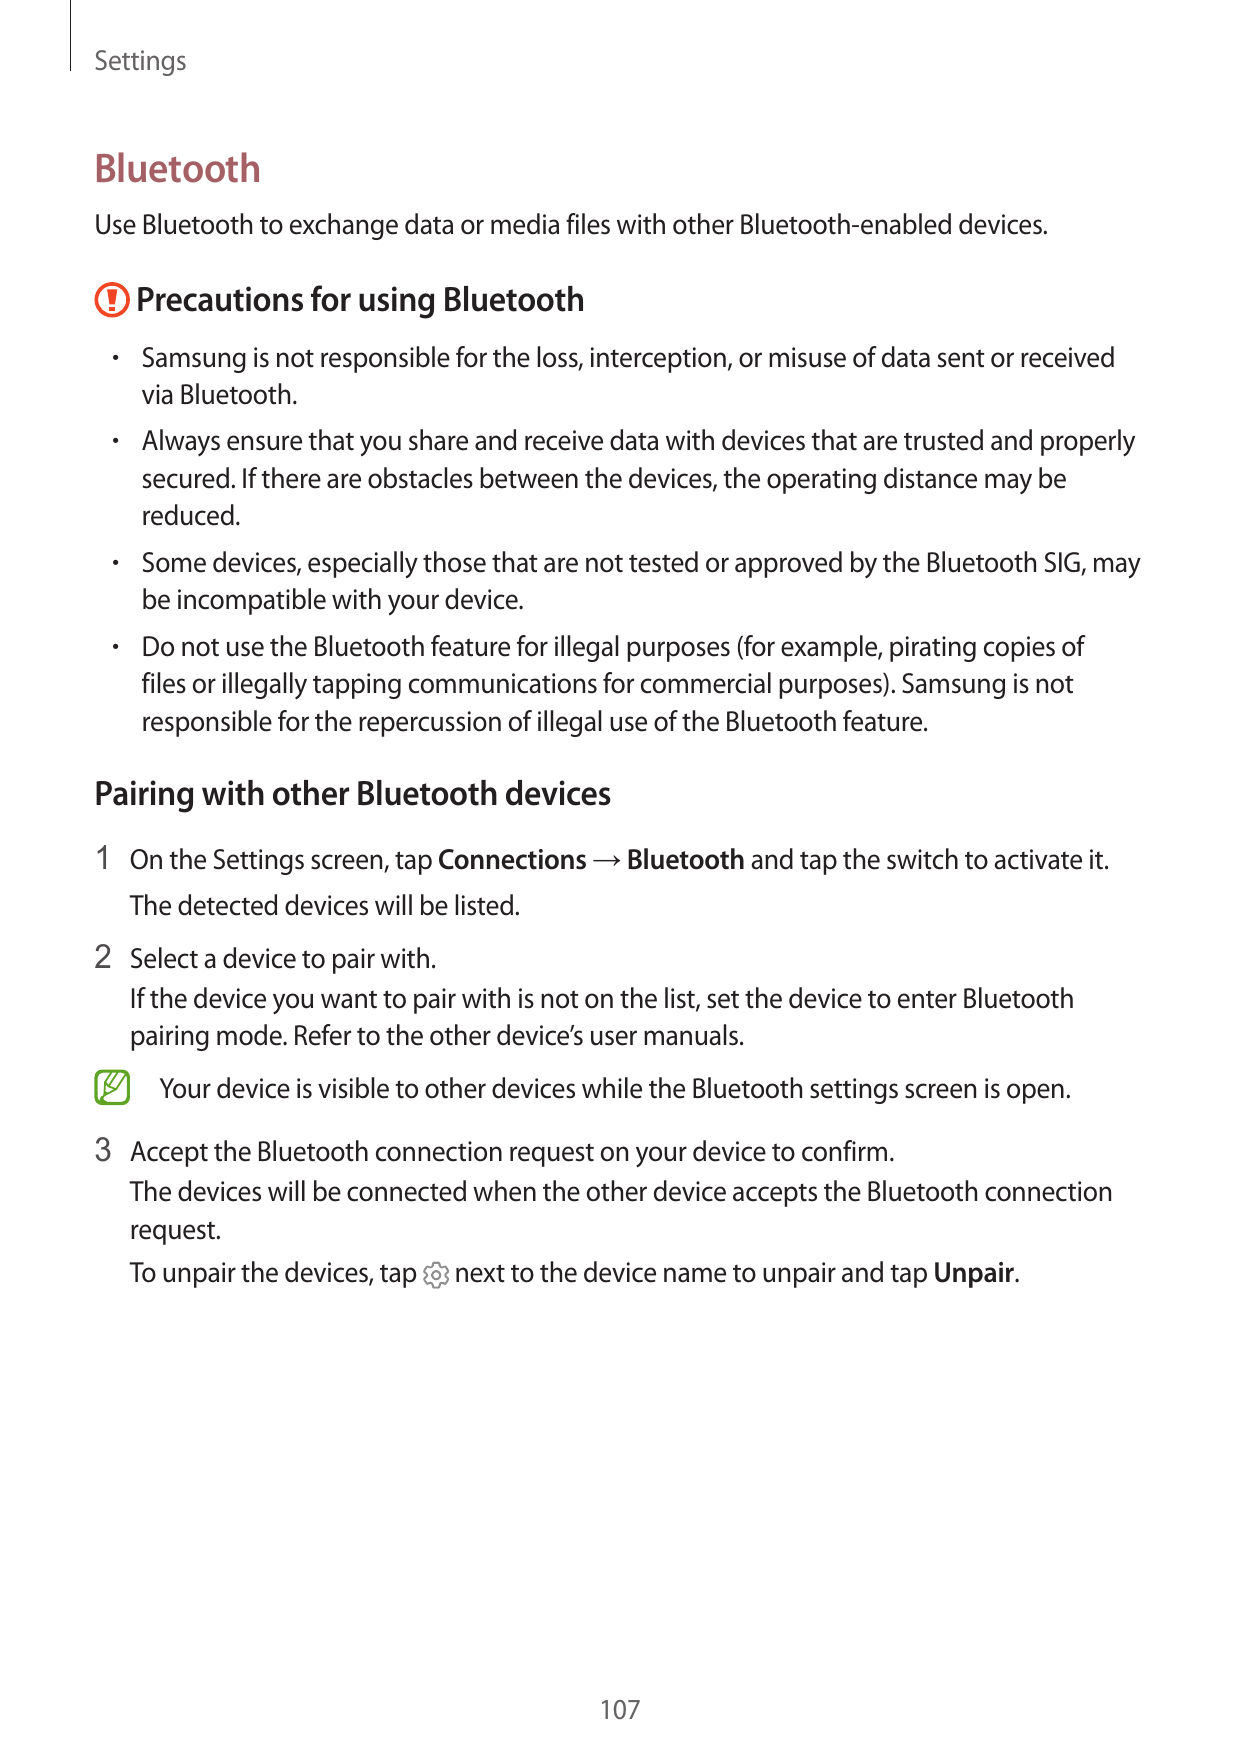 SettingsBluetoothUse Bluetooth to exchange data or media files with other Bluetooth-enabled devices.Precautions for using Blueto